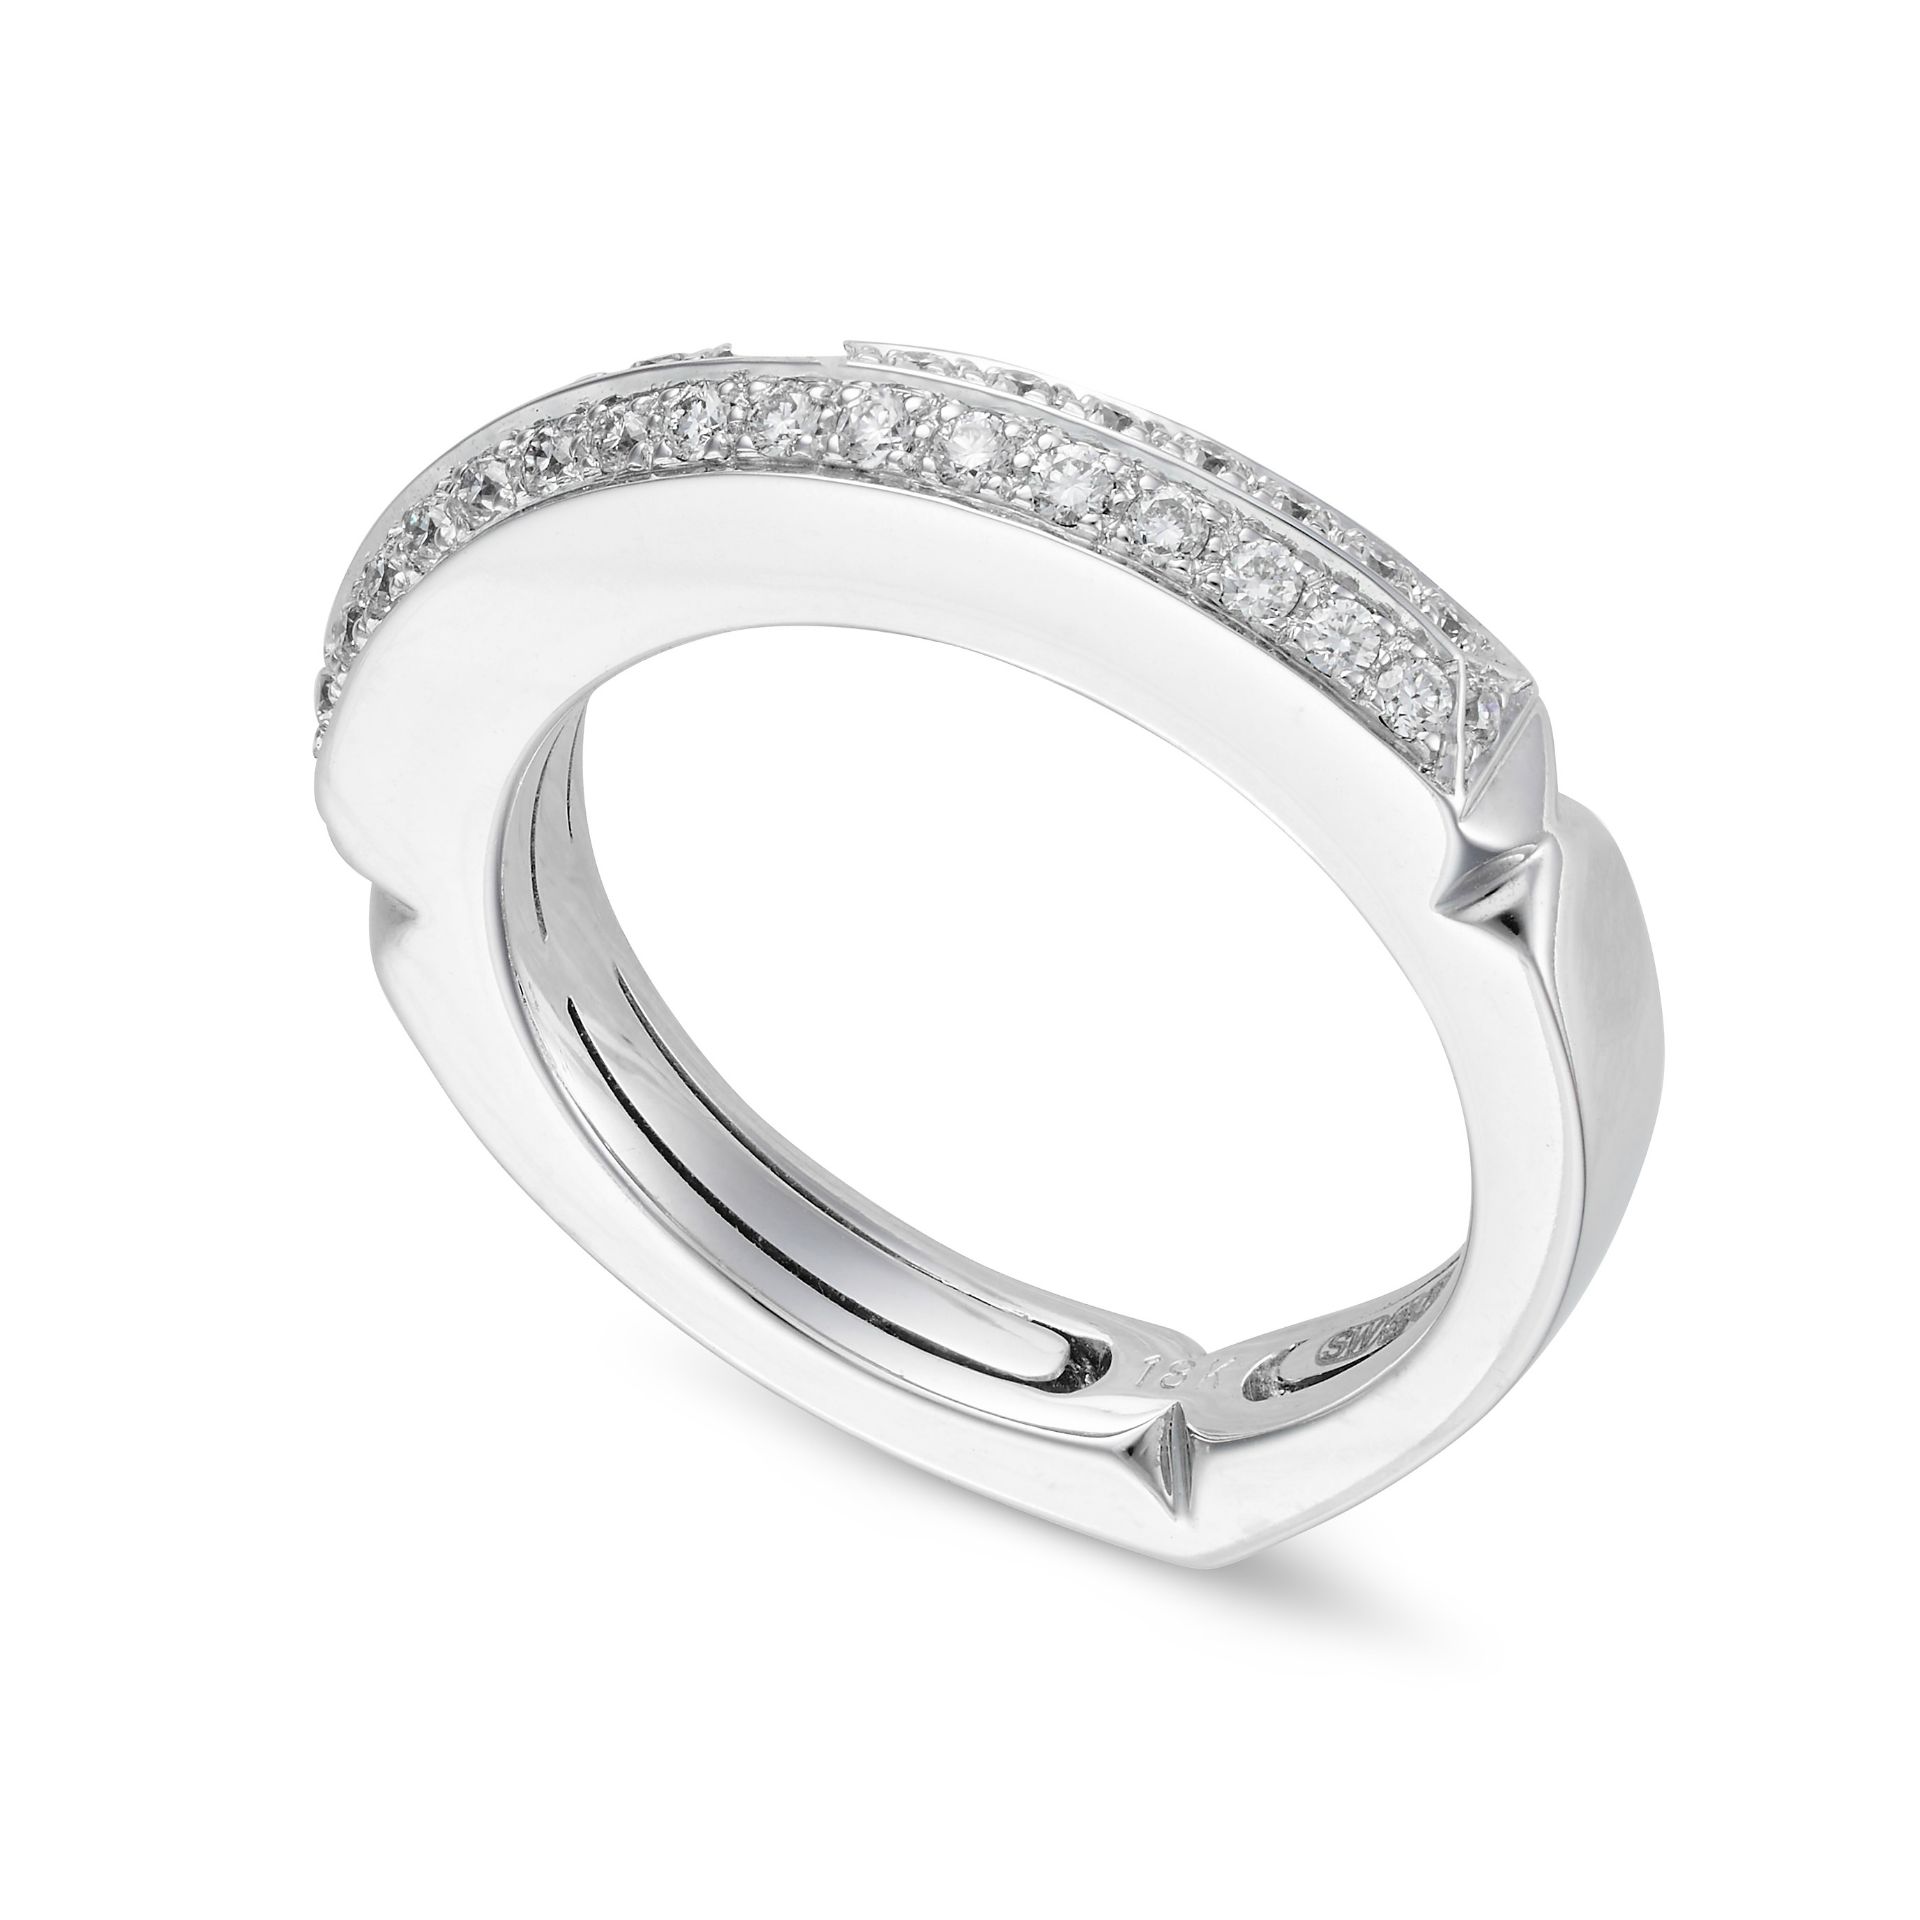 STEPHEN WEBSTER, A DIAMOND HALF ETERNITY RING in 18ct white gold, the stylised band pave set with... - Bild 2 aus 2